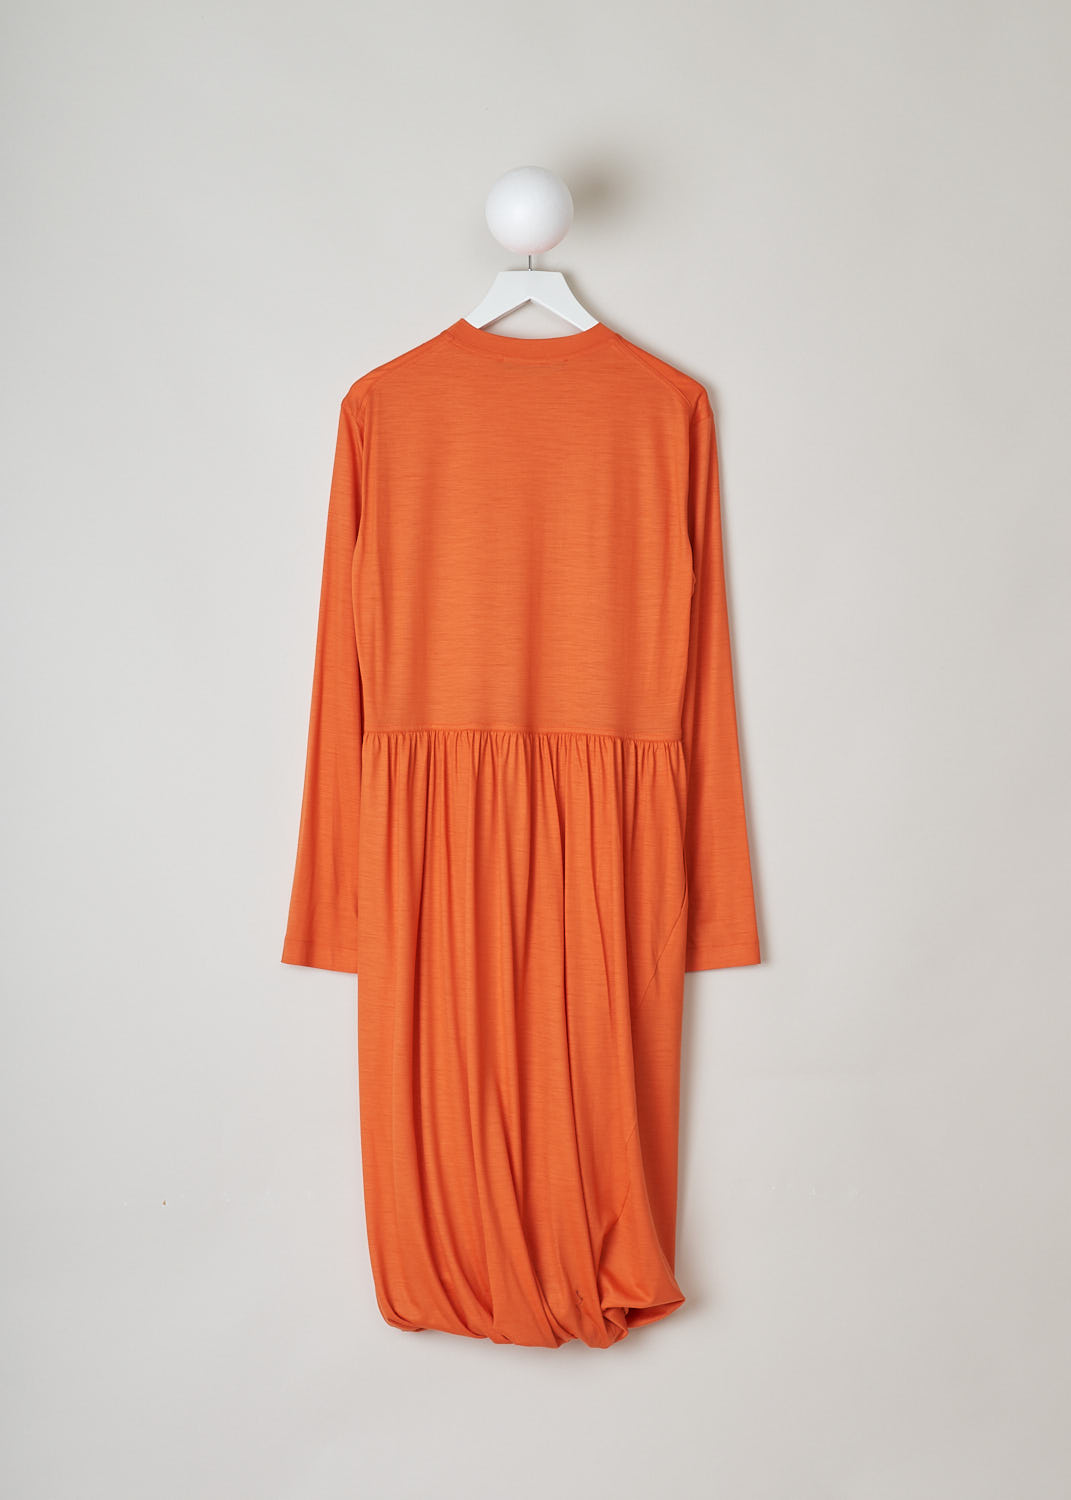 SOFIE D’HOORE, ORANGE LONG SLEEVE DRESS, DEMURE_WOJE_PAPAYA, Orange, Back, This orange mid-length dress features a round neckline, a plain long sleeve bodice and a twisted balloon skirt. A single side pocket can be found concealed in the seam. 
